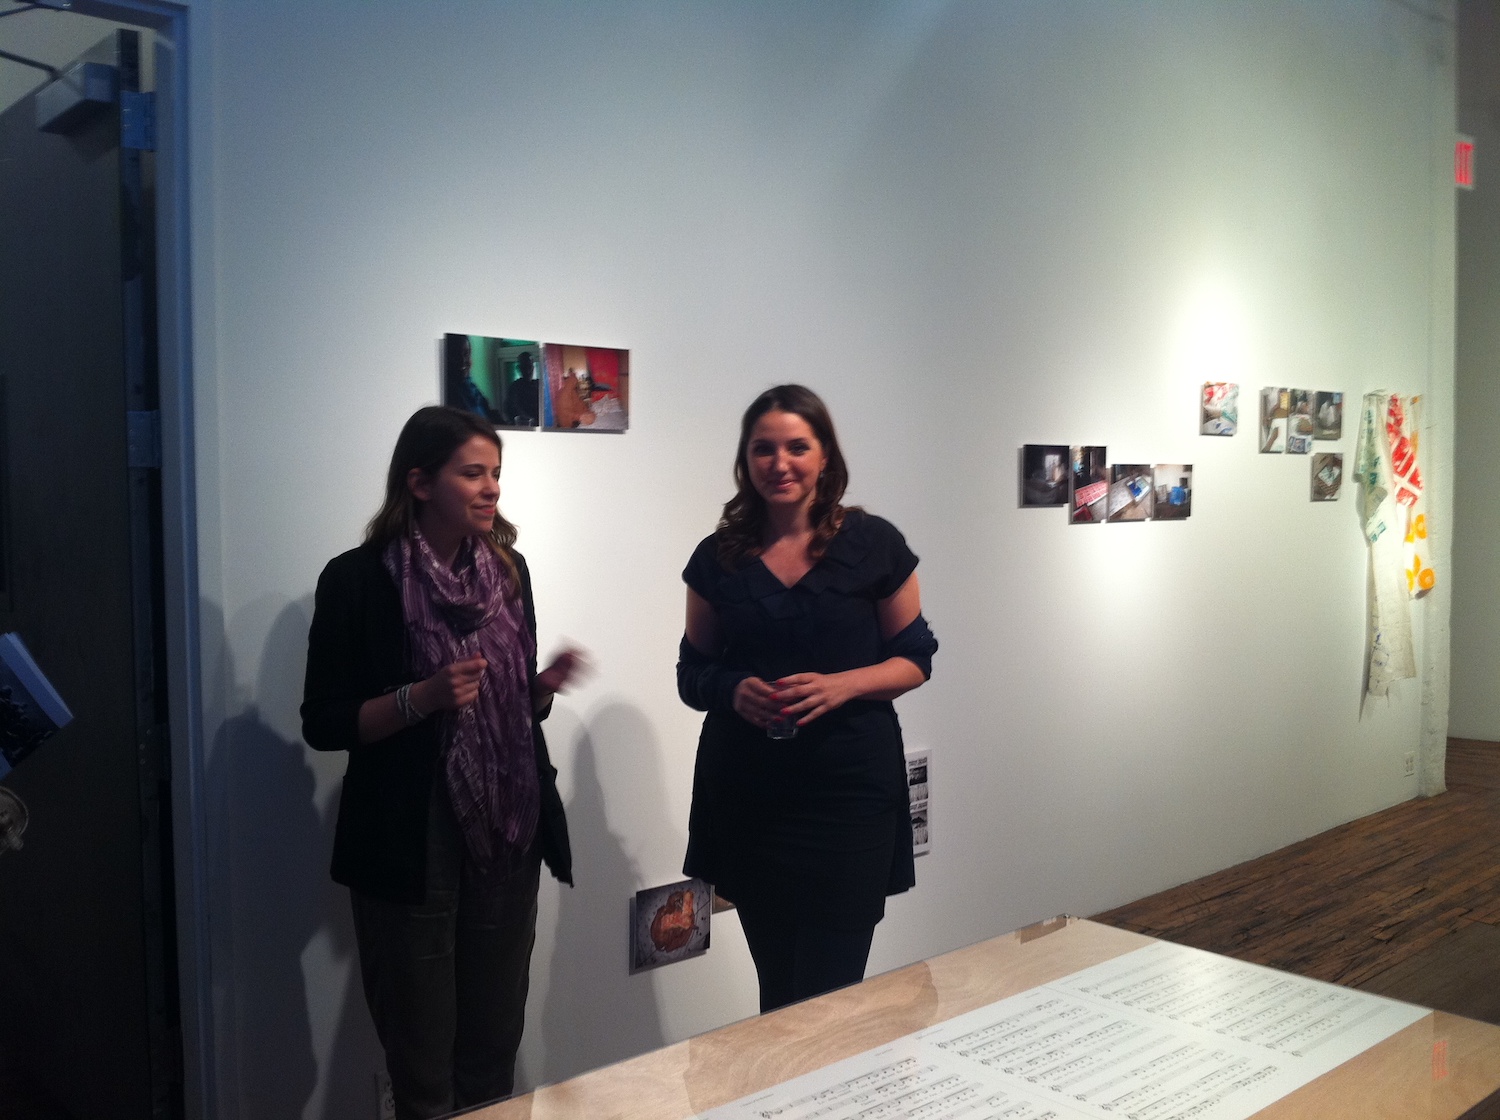 Figure 5: ISCP curator Kari Conte is on the left, and Maja Ćirić on the right. After receiving ISCP Curator Award in 2011, Ćirić presented an exhibition, The Power to Host, at ISCP to explore potential in the contemporary art world globally.